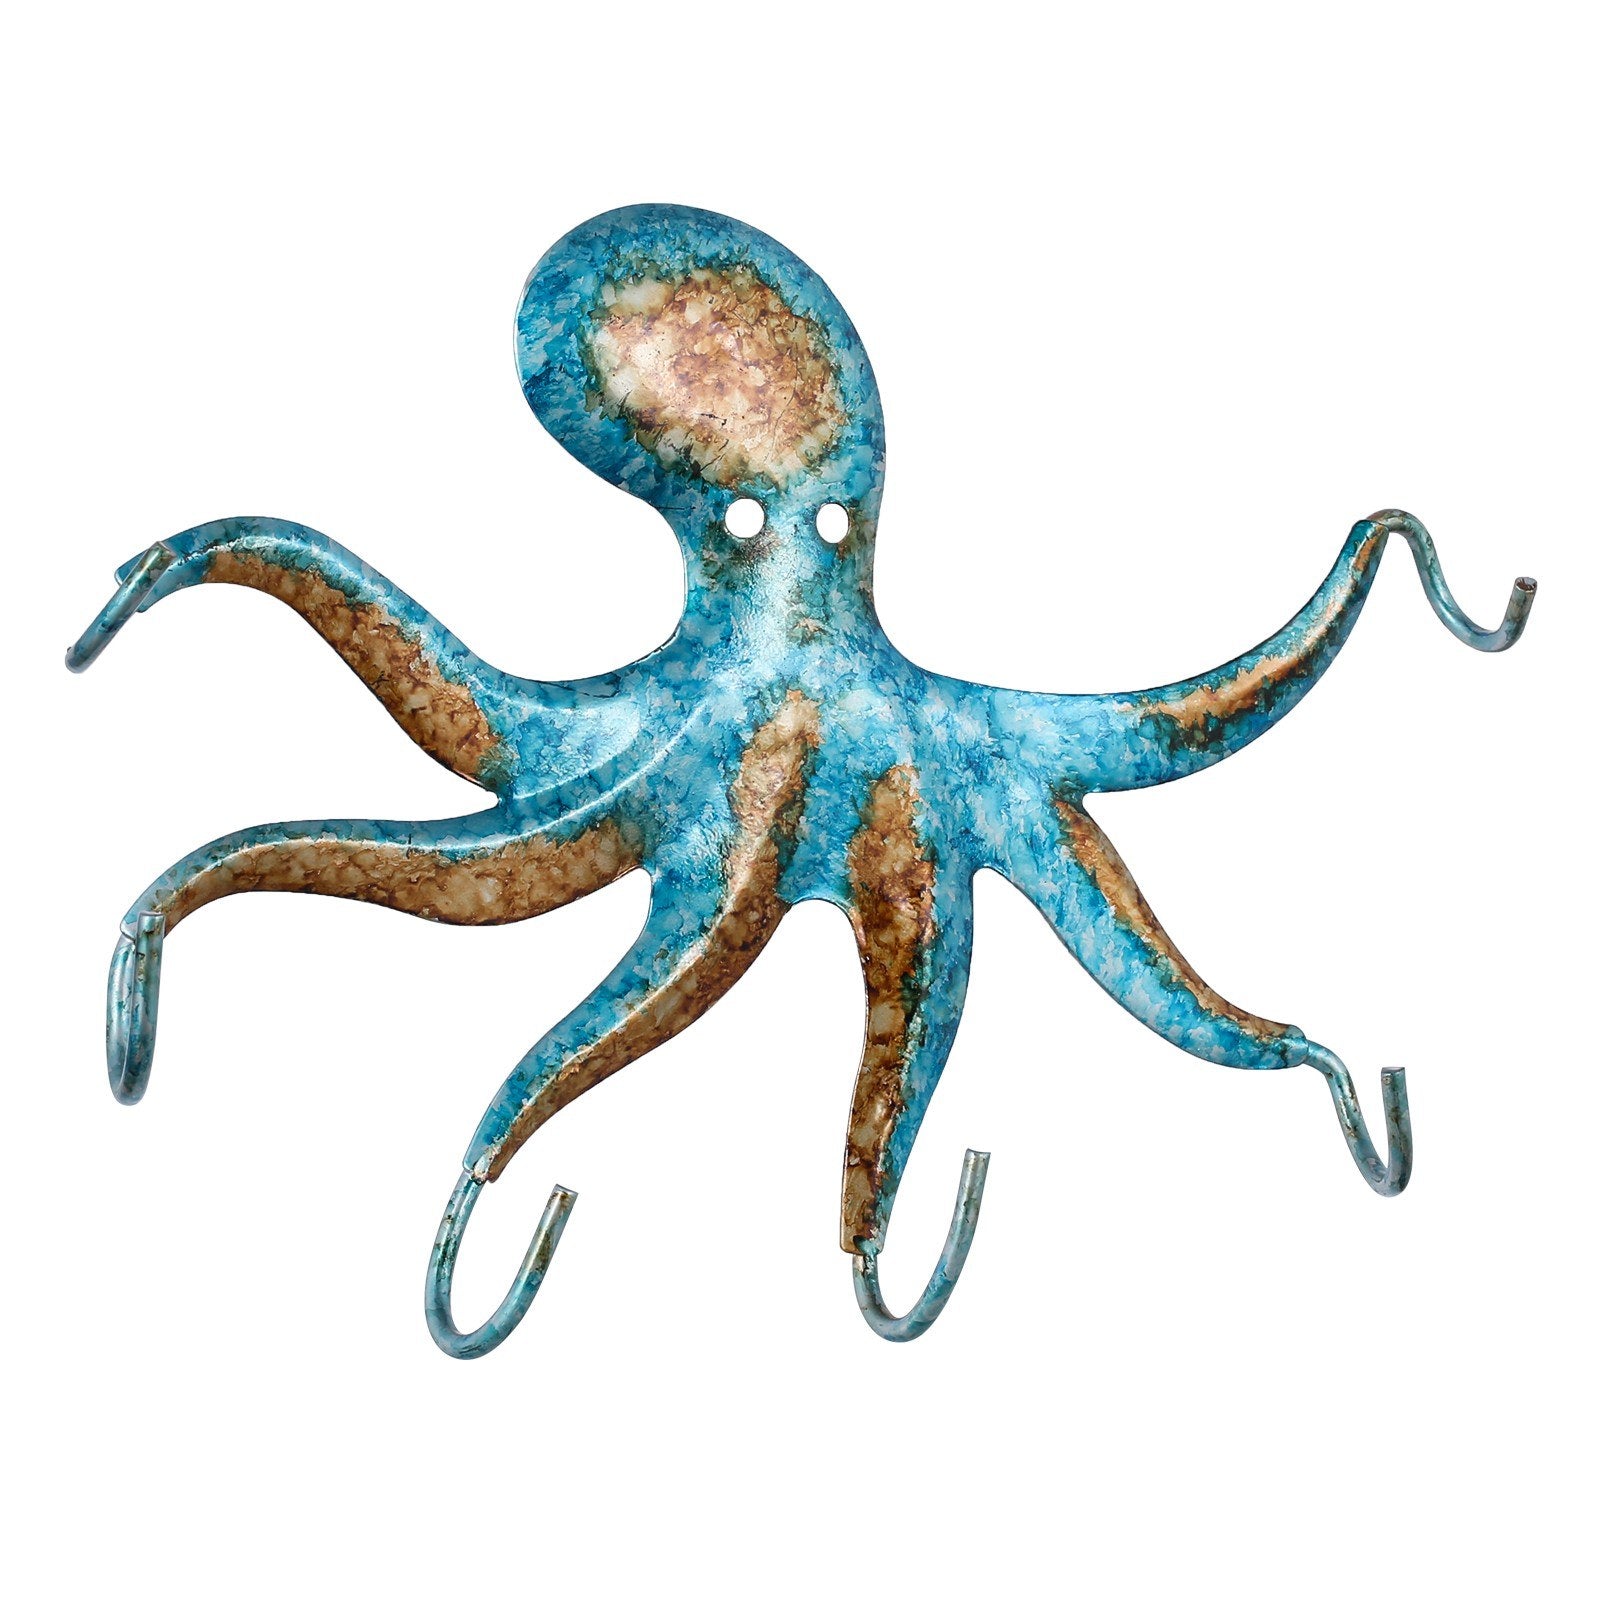 This octopus wall hook is really beautiful & has a wonderful color